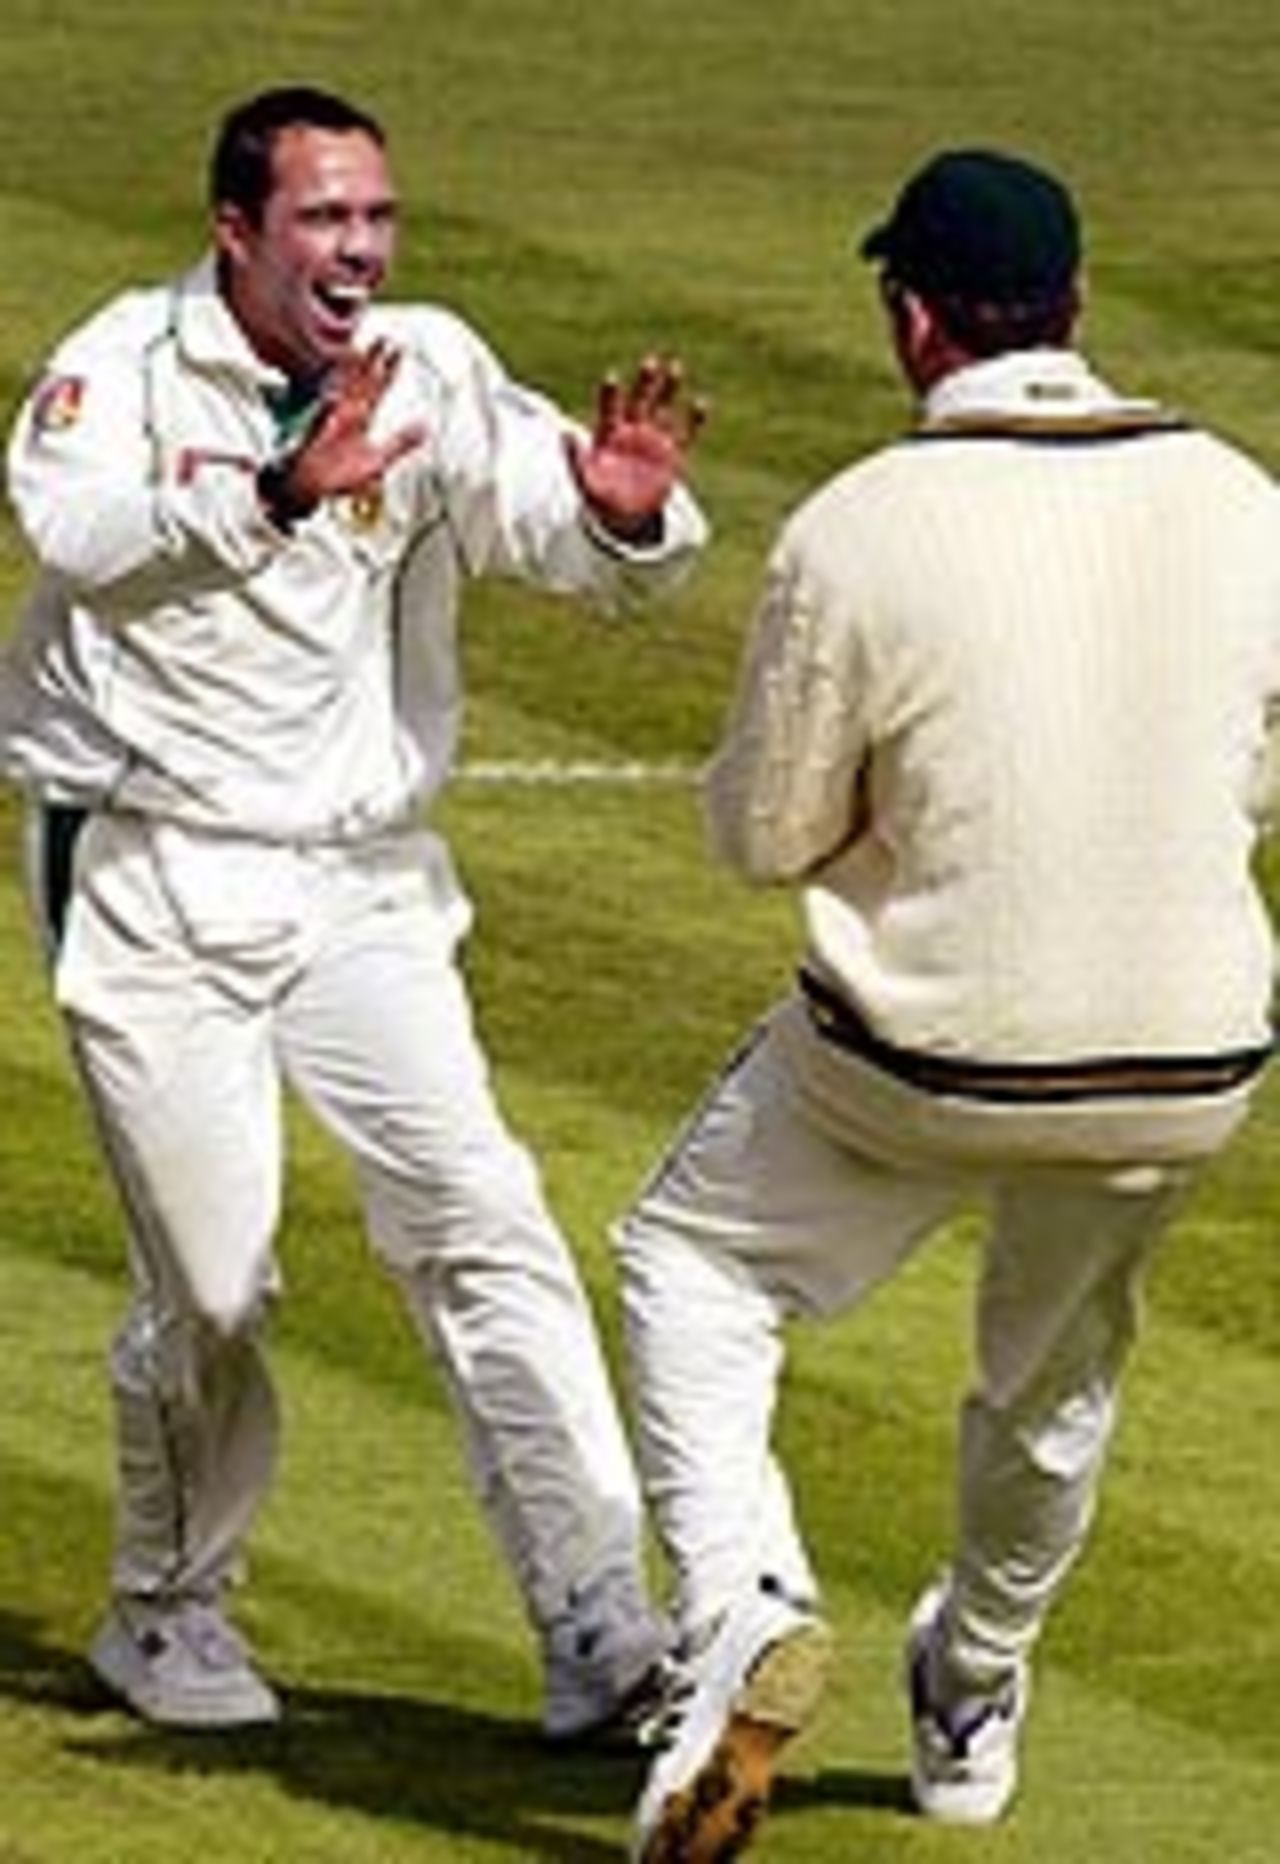 Nicky Boje and Graeme Smith celebrate the wicket of Stephen Fleming, New Zealand v South Africa, 3rd Test, Wellington, 1st day